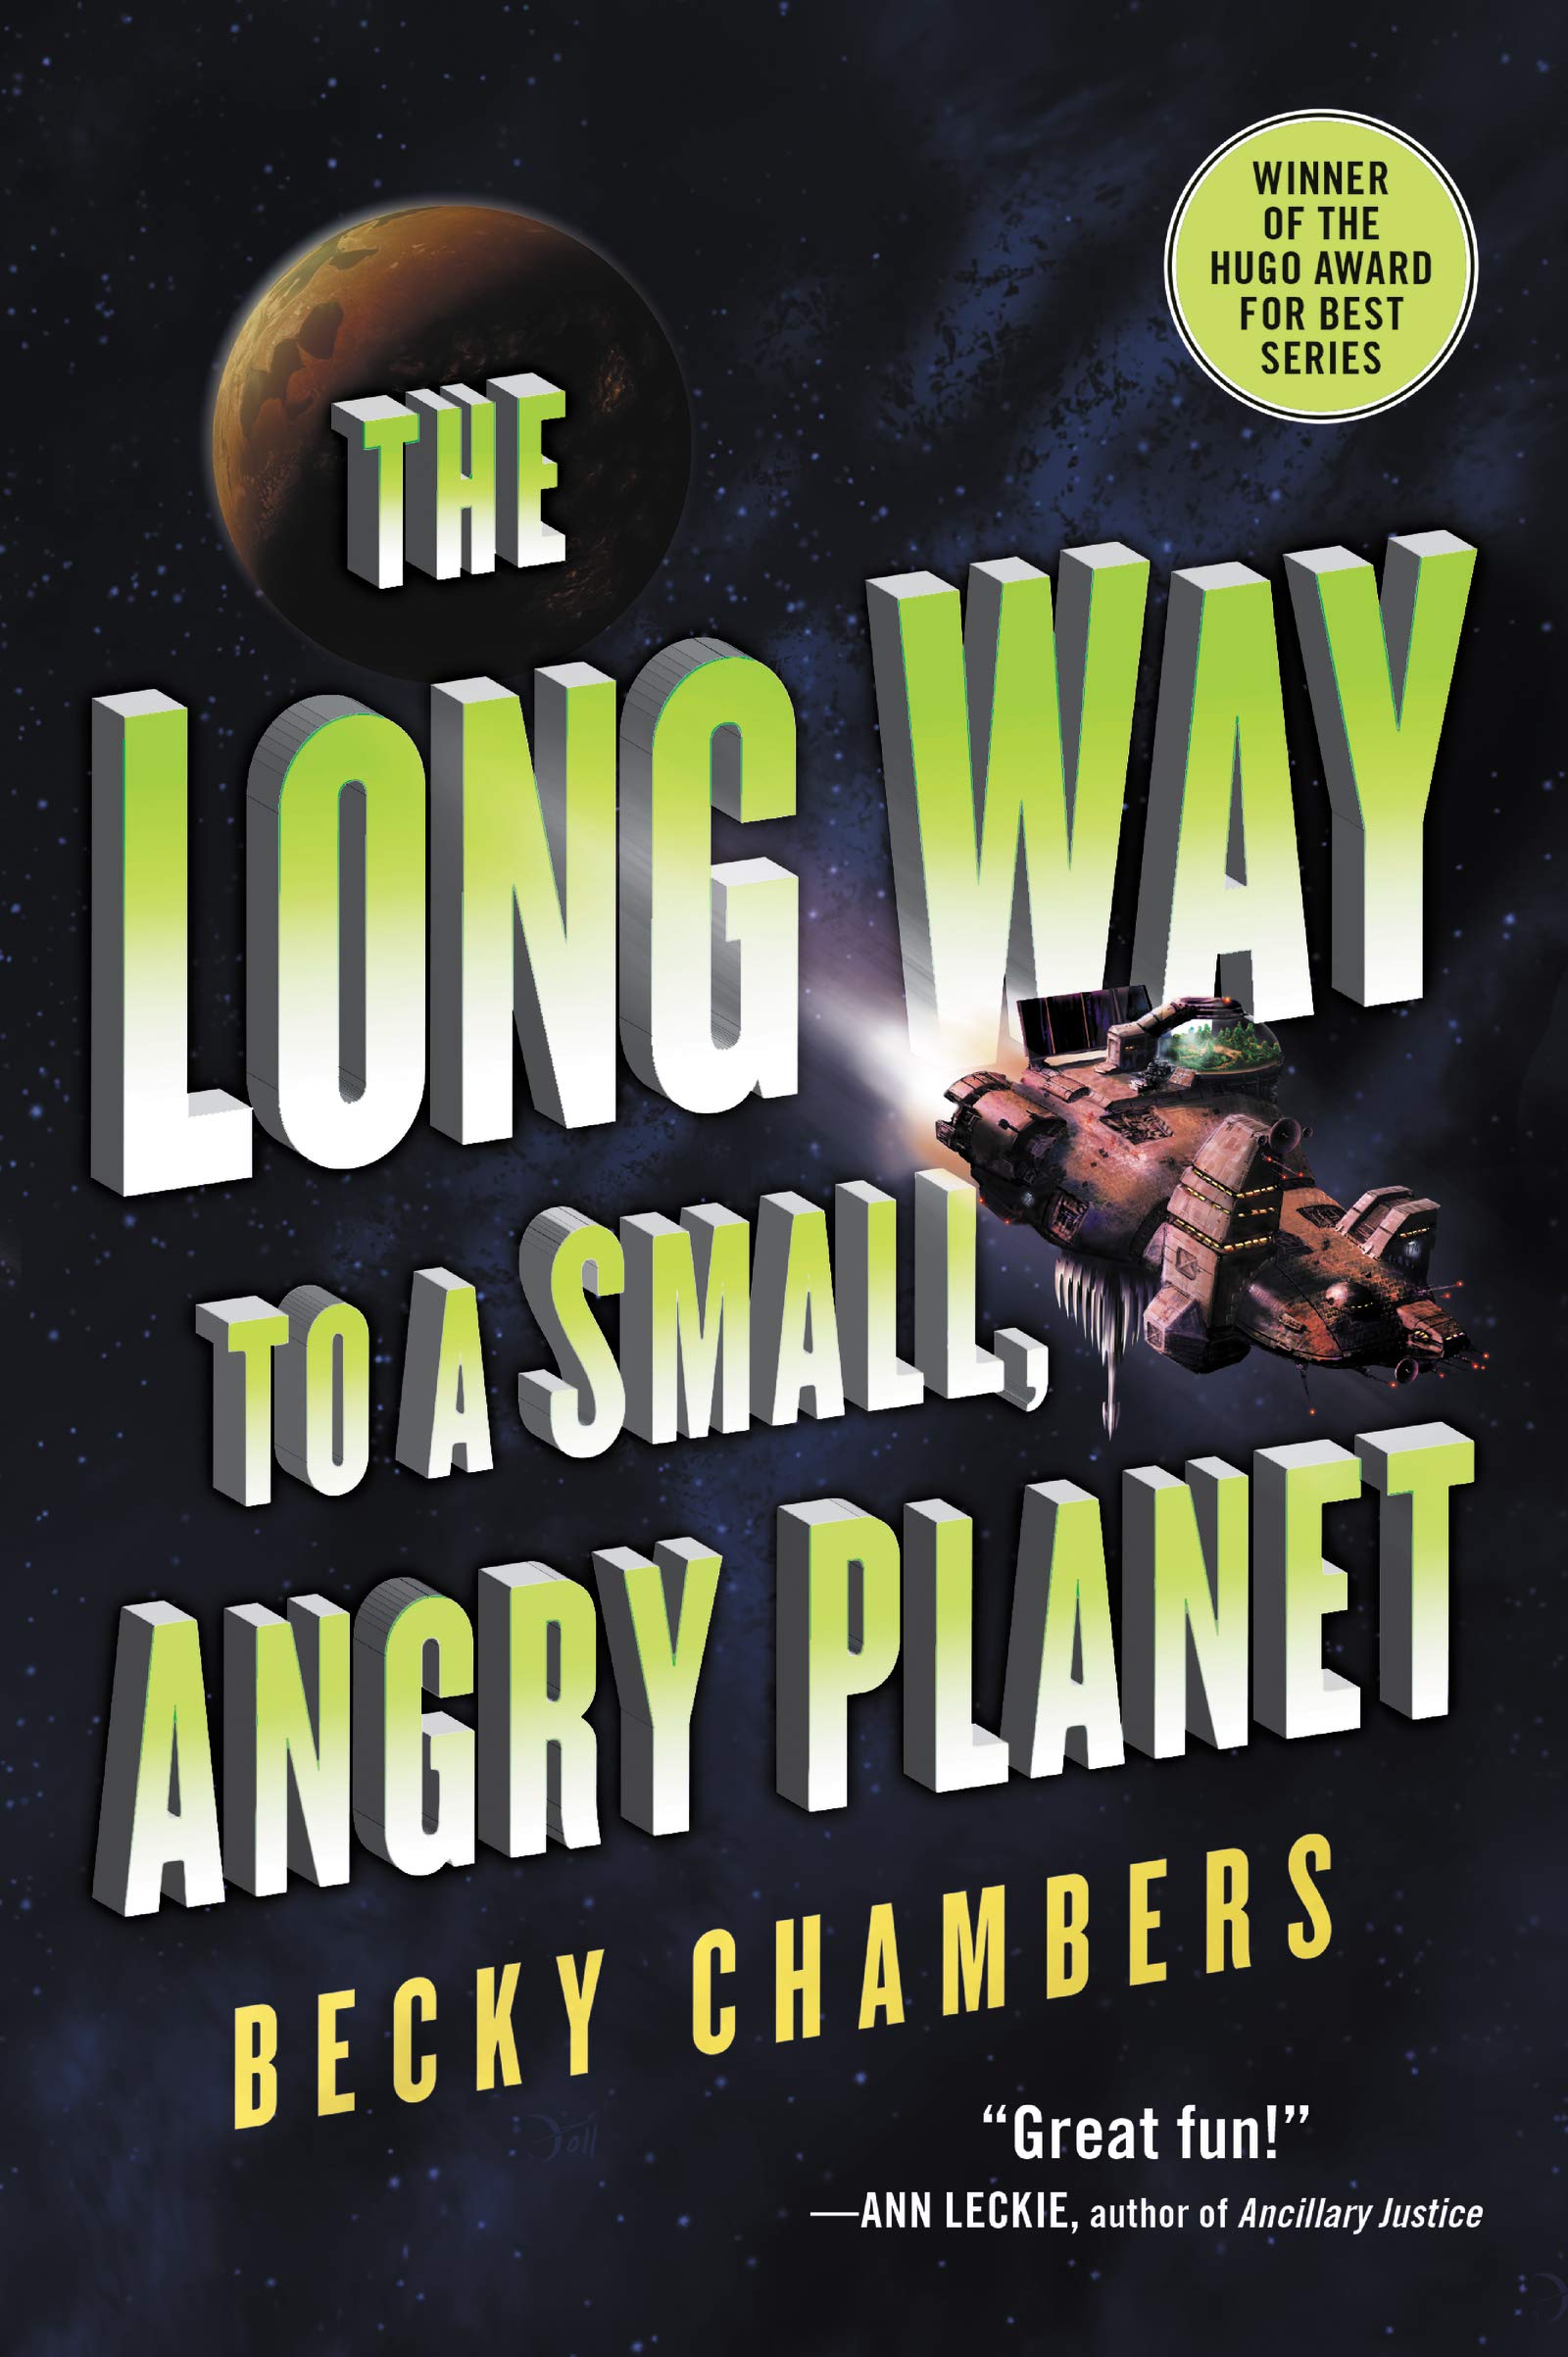 a long way to a small, angry planet by becky chambers